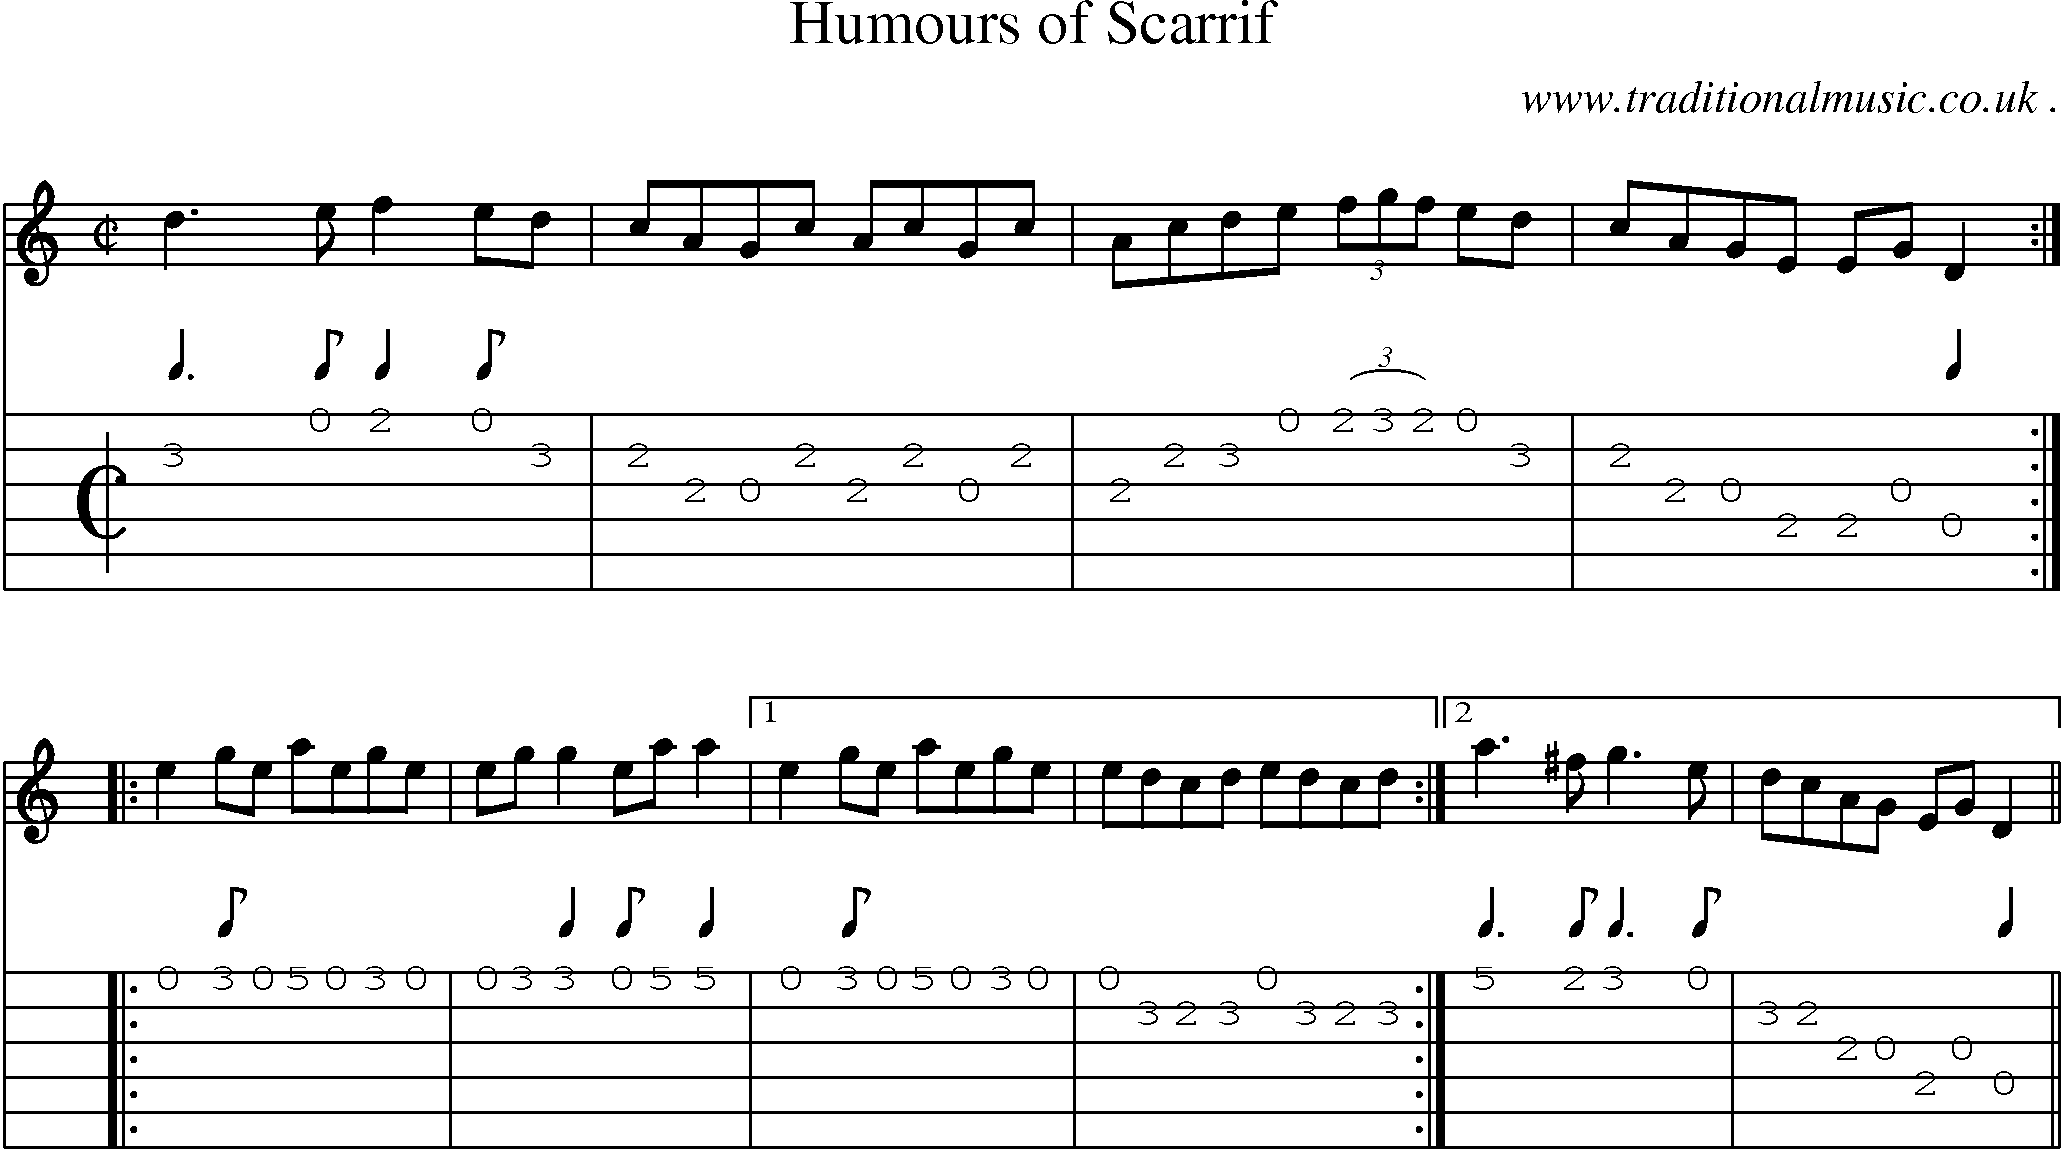 Sheet-Music and Guitar Tabs for Humours Of Scarrif